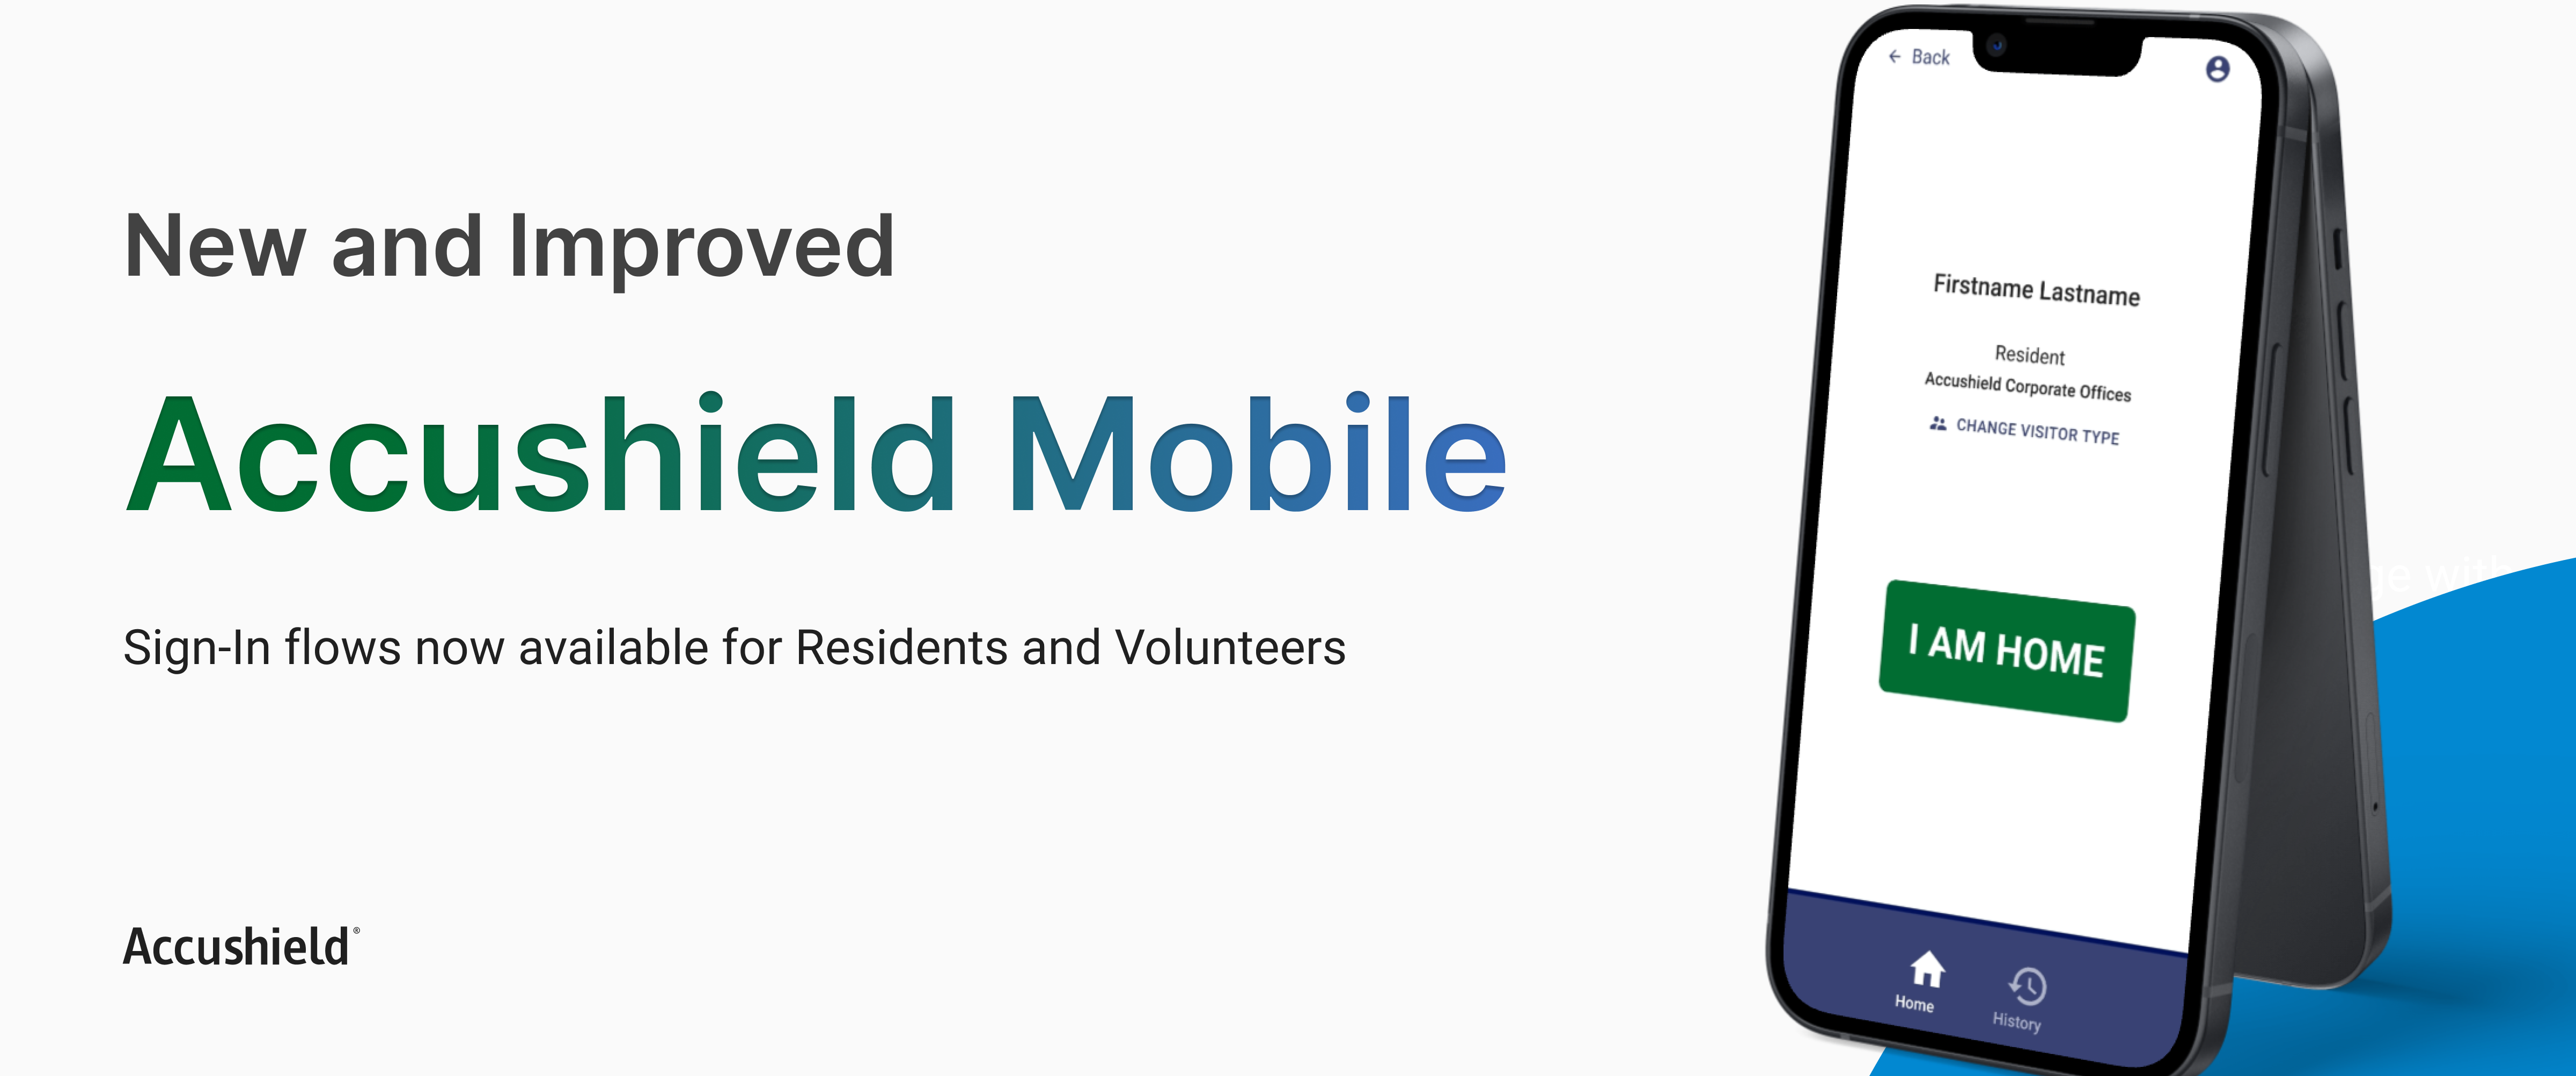 iphone screen showing new and improved Accushield Mobile app sign-in now available for residents and volunteers